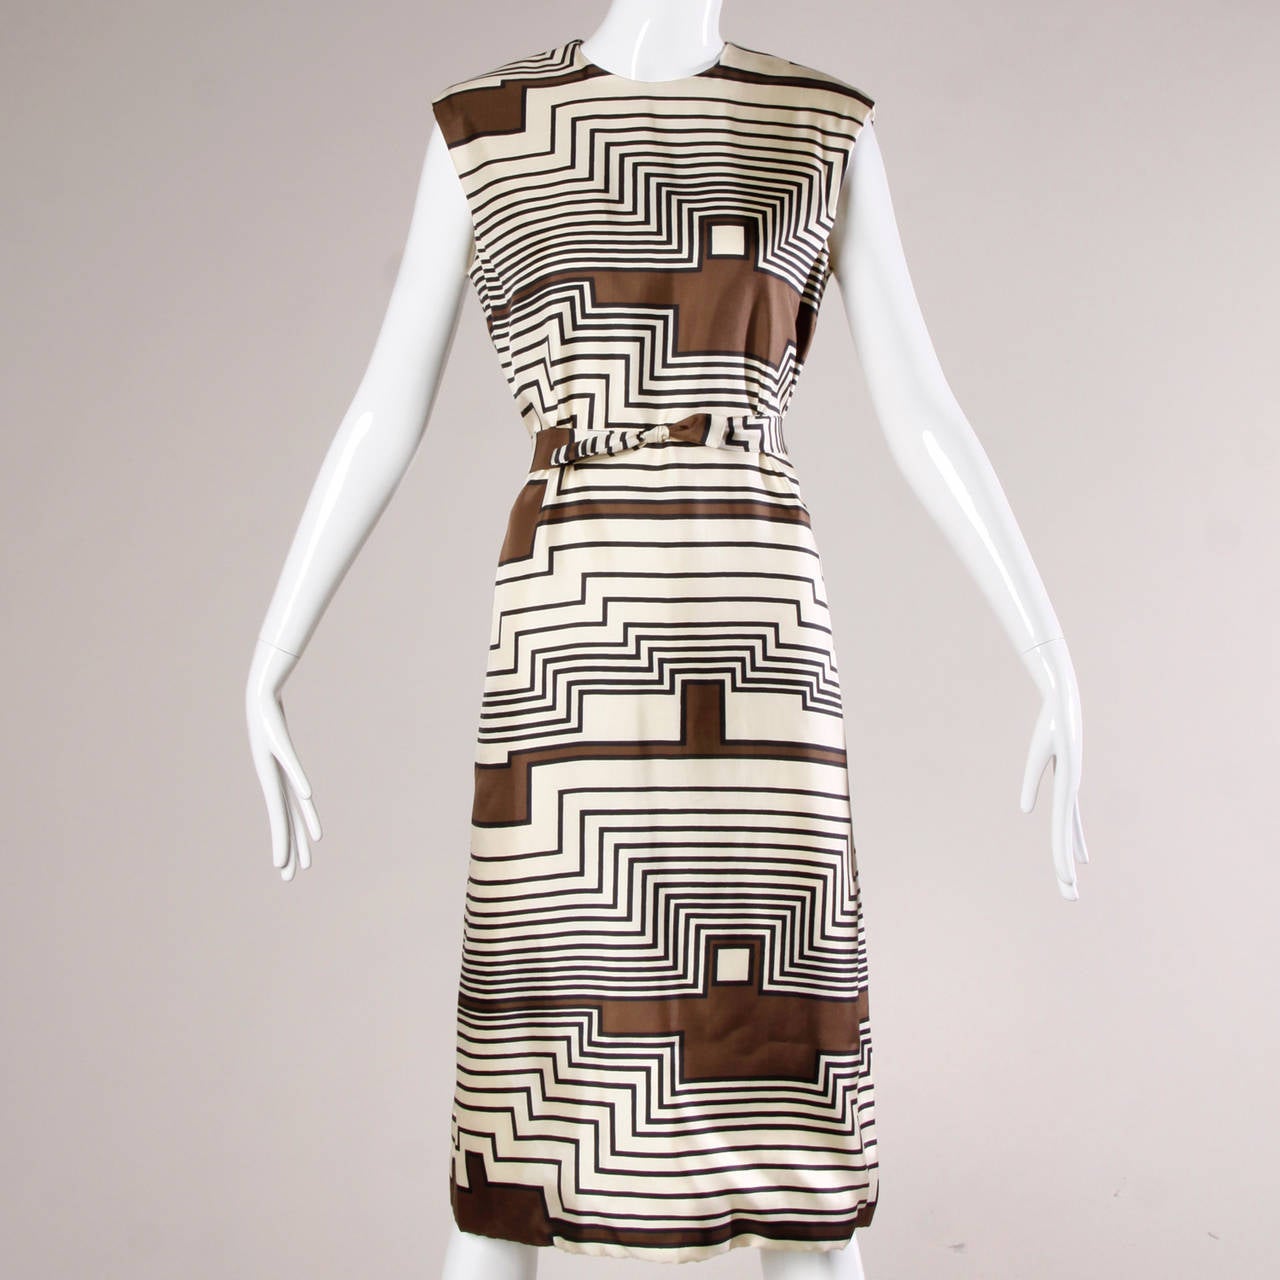 Gorgeous medium weight creamy silk shift dress with a graphic op art print by Adele Simpson for I. Magnin. The dress is unworn with the original price tags still attached! The dress comes with a matching scarf and sash. 

Details:

Fully lined